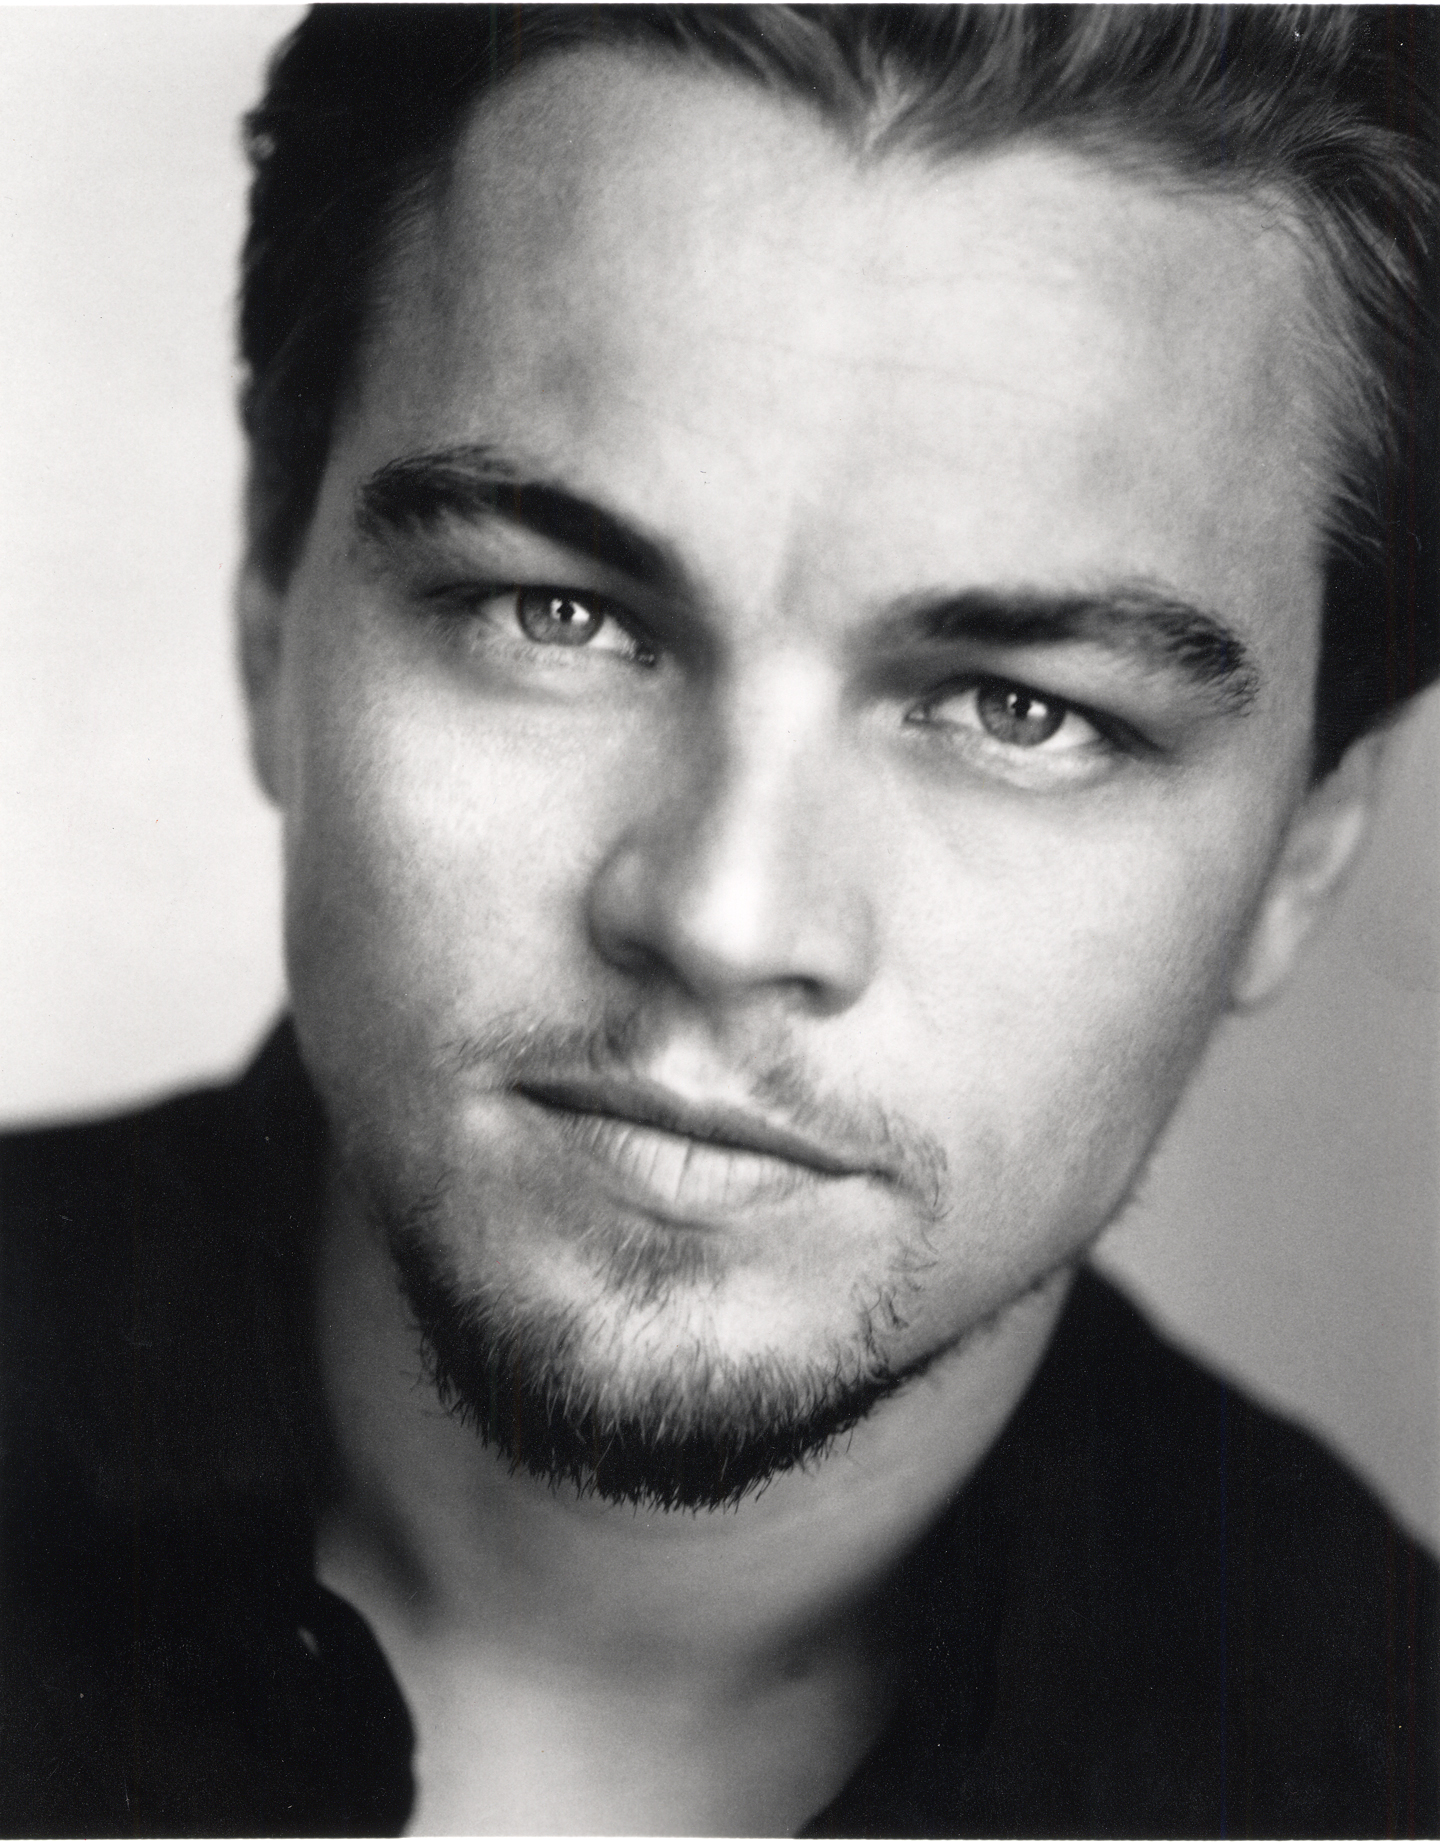 Leonardo DiCaprio Joins WWF to Launch “Hands Off My Parts” Initiative ...